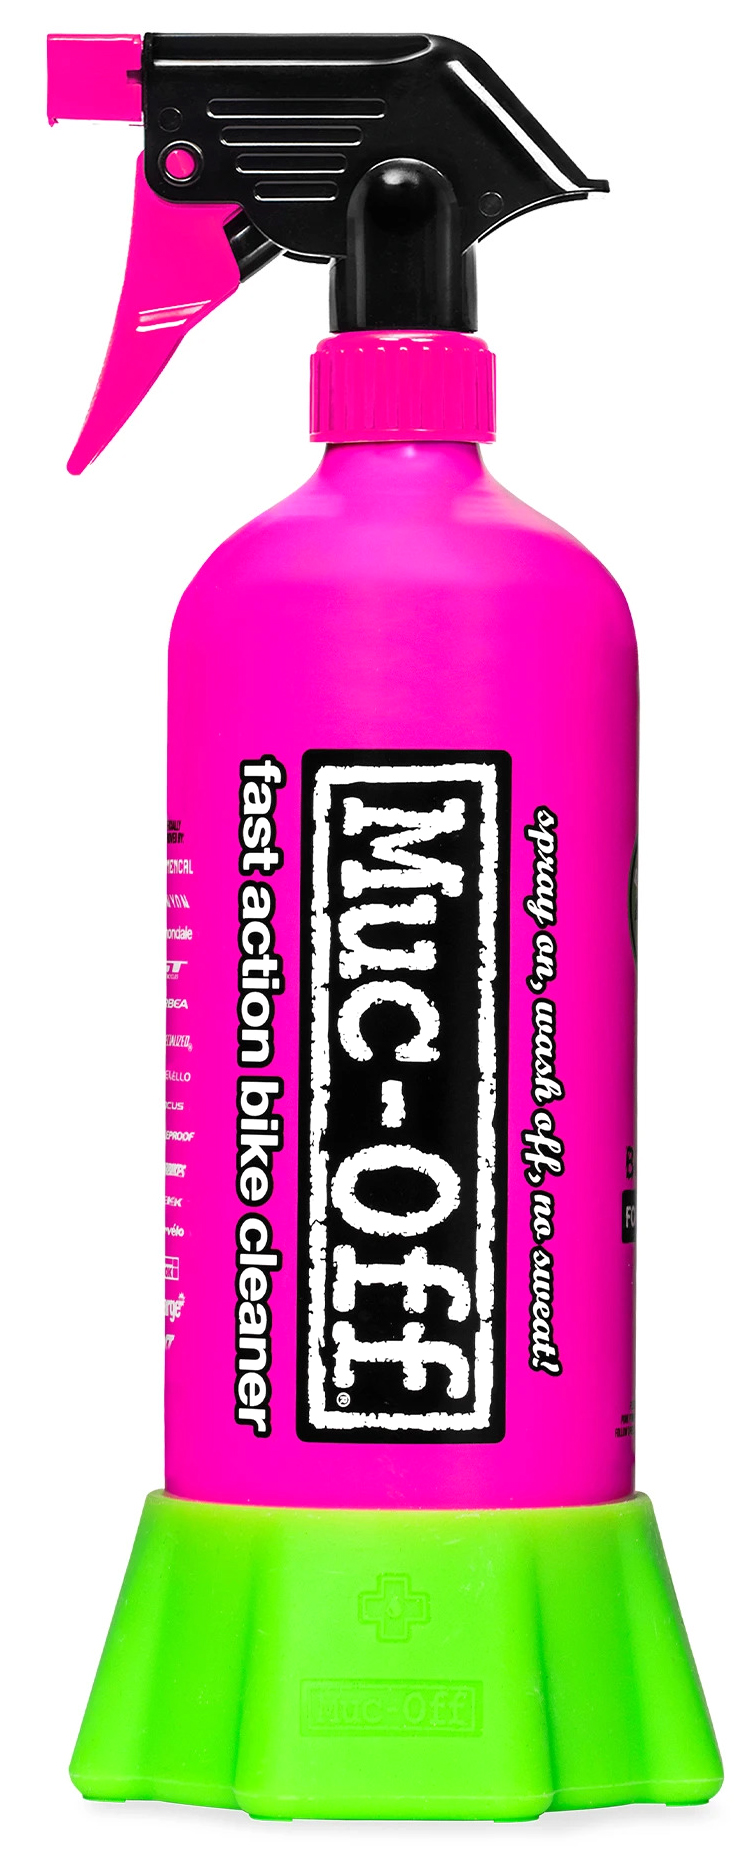 MUC-OFF Punk Powder Motorcycle Cleaner 4 pack + bottle - Shampoo